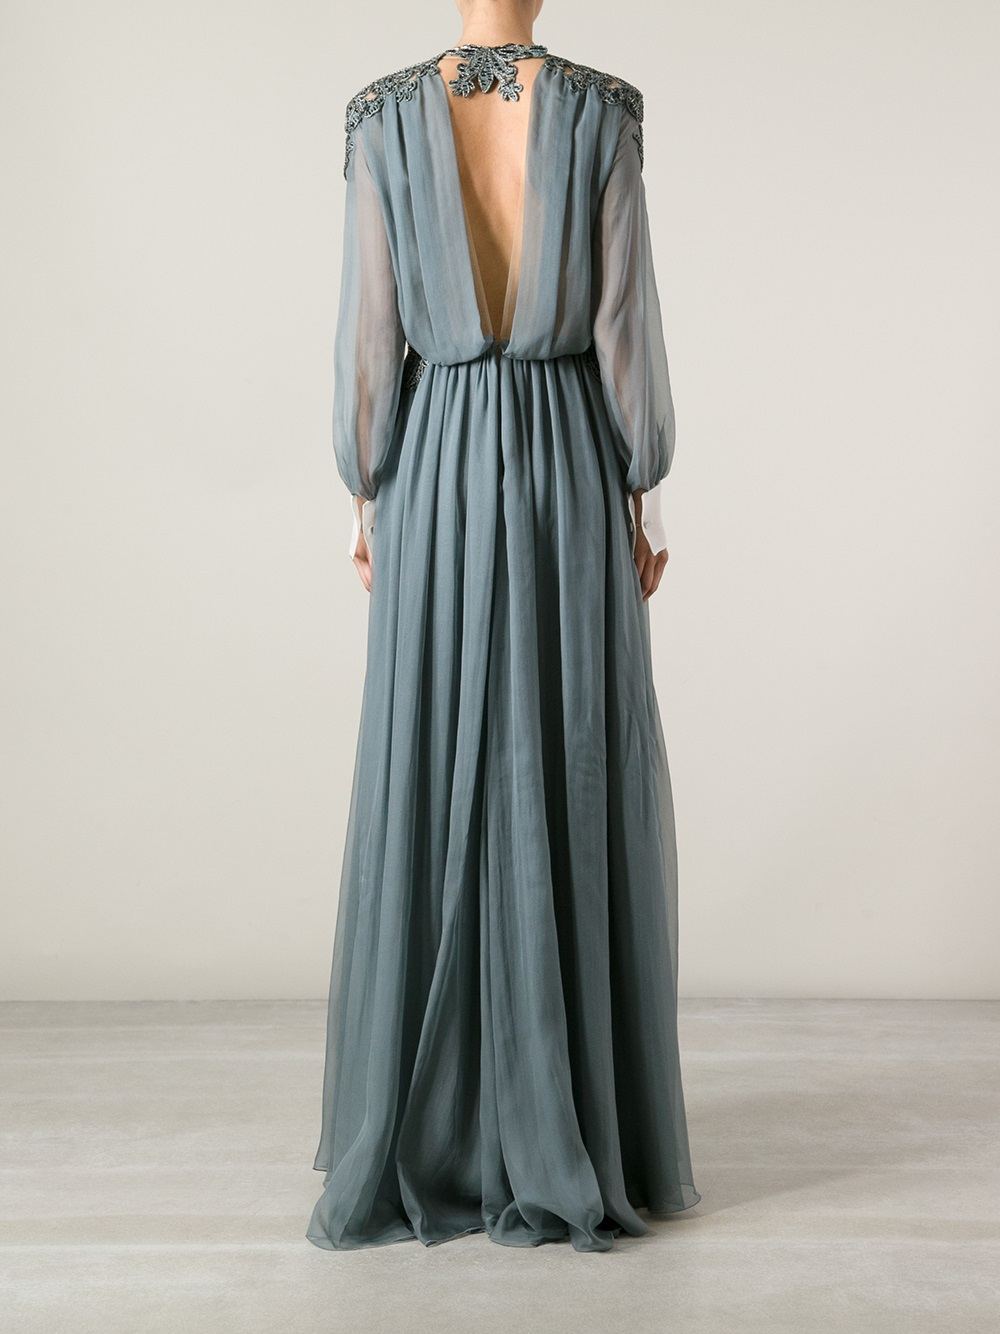 Valentino Embellished Maxi Dress in Grey (Gray) - Lyst